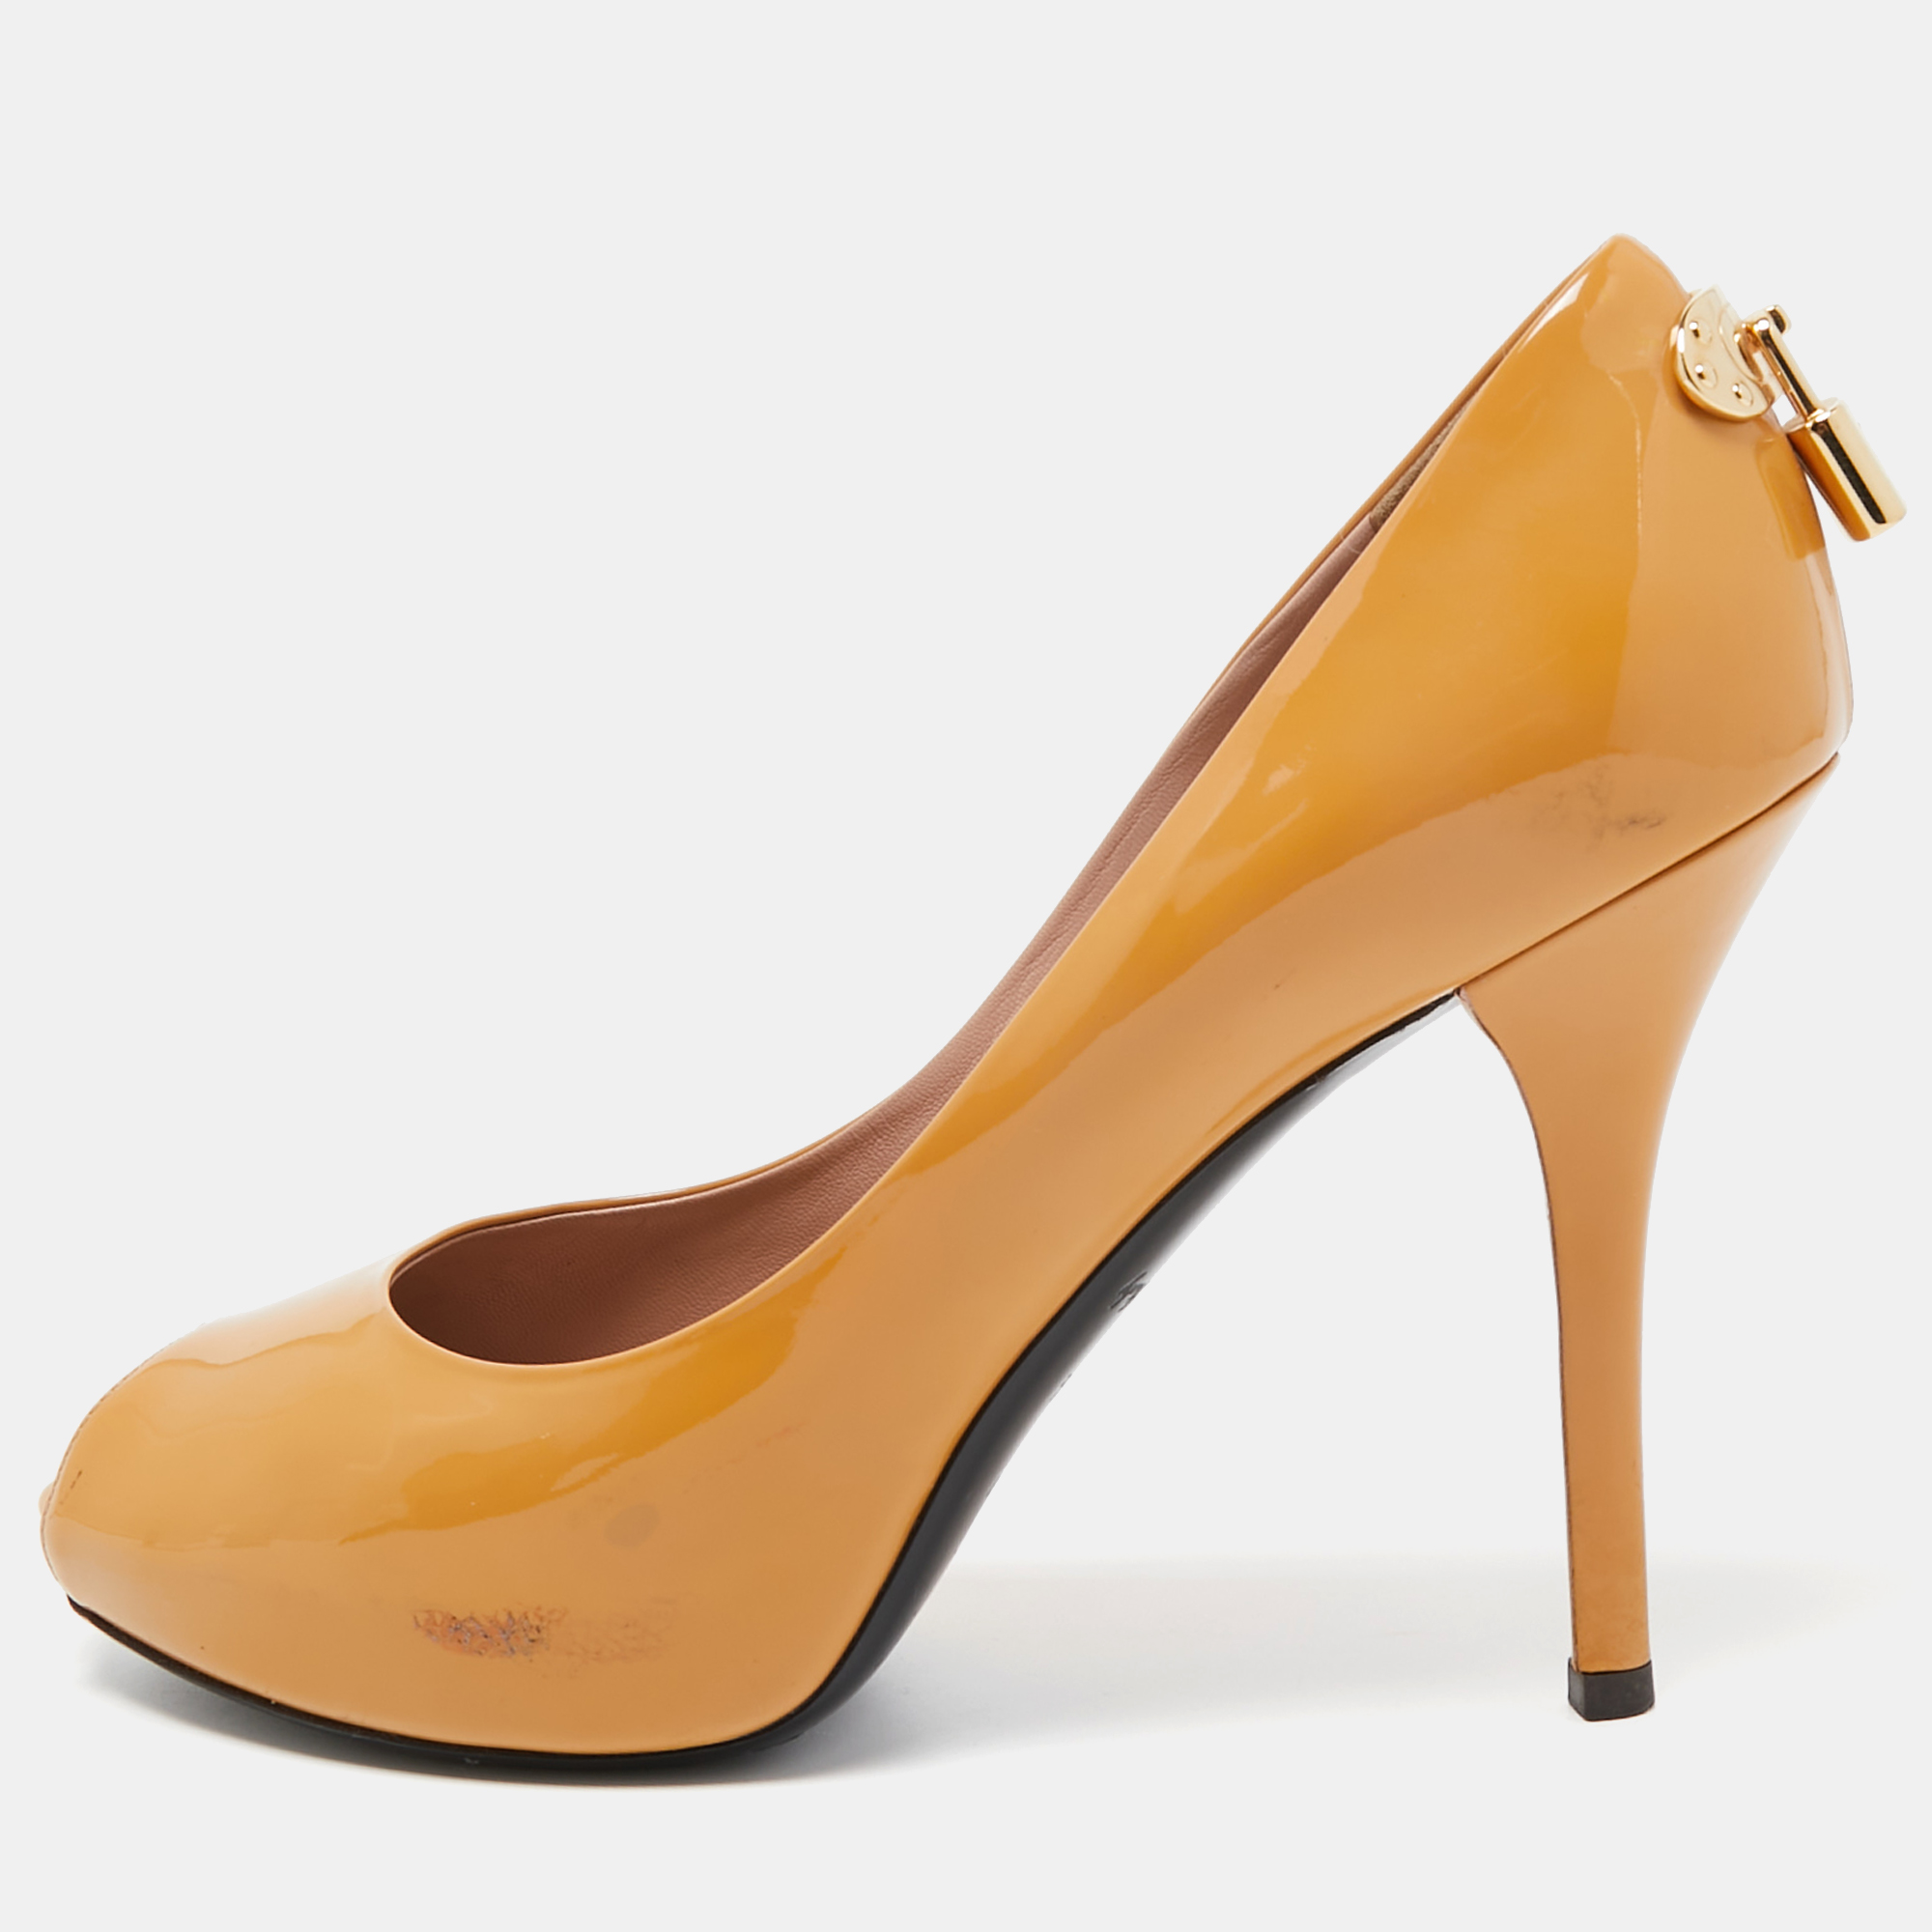 The fashion house's tradition of excellence coupled with modern design sensibilities works to make these LV pumps a fabulous choice. Theyll help you deliver a chic look with ease.